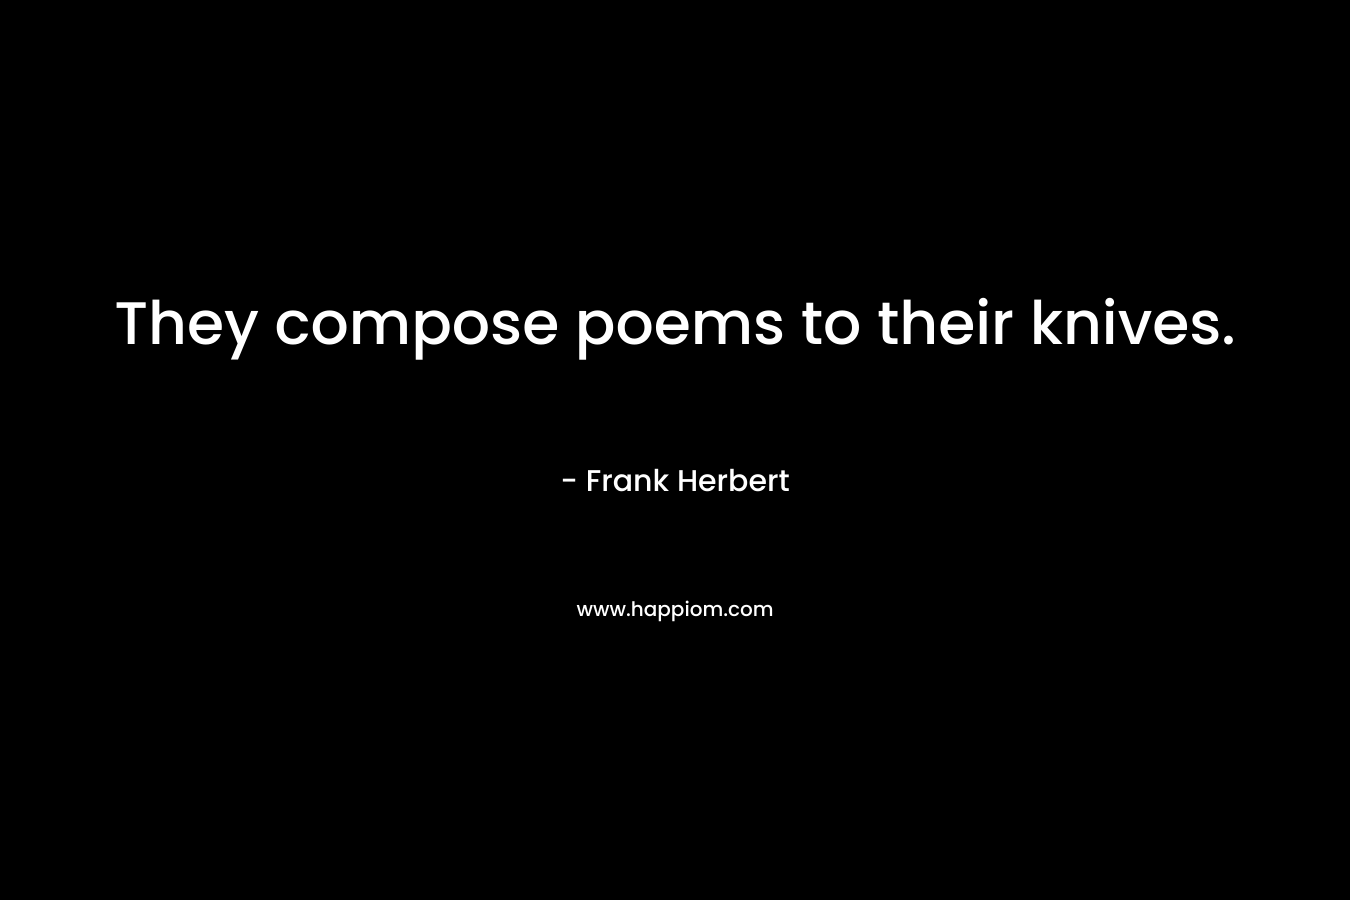 They compose poems to their knives.